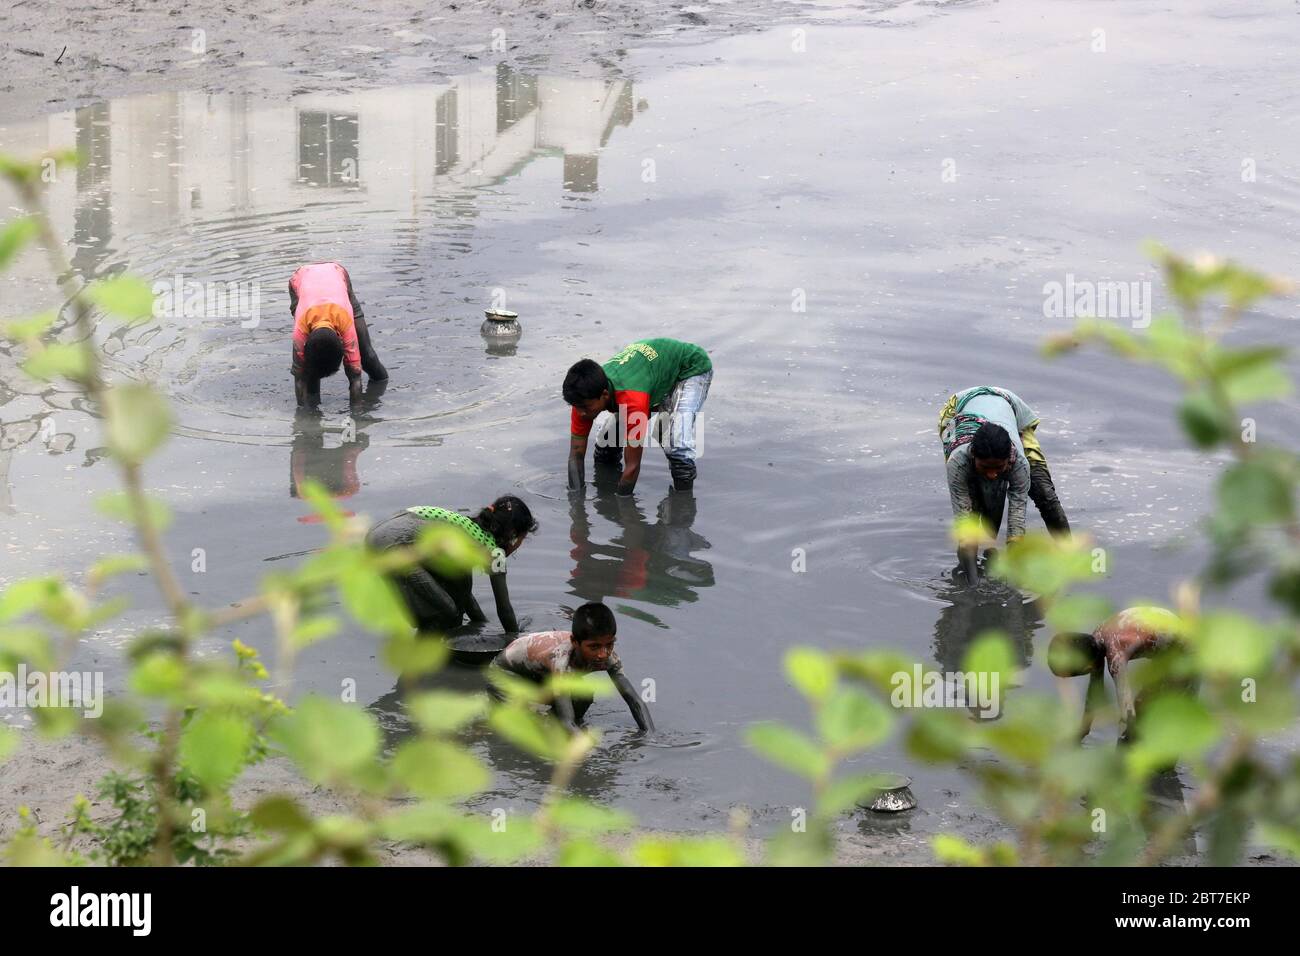 Dhaka 23 April 2015. Local people catching fish in a river at savar in Dhaka.photo by leadfoto Stock Photo